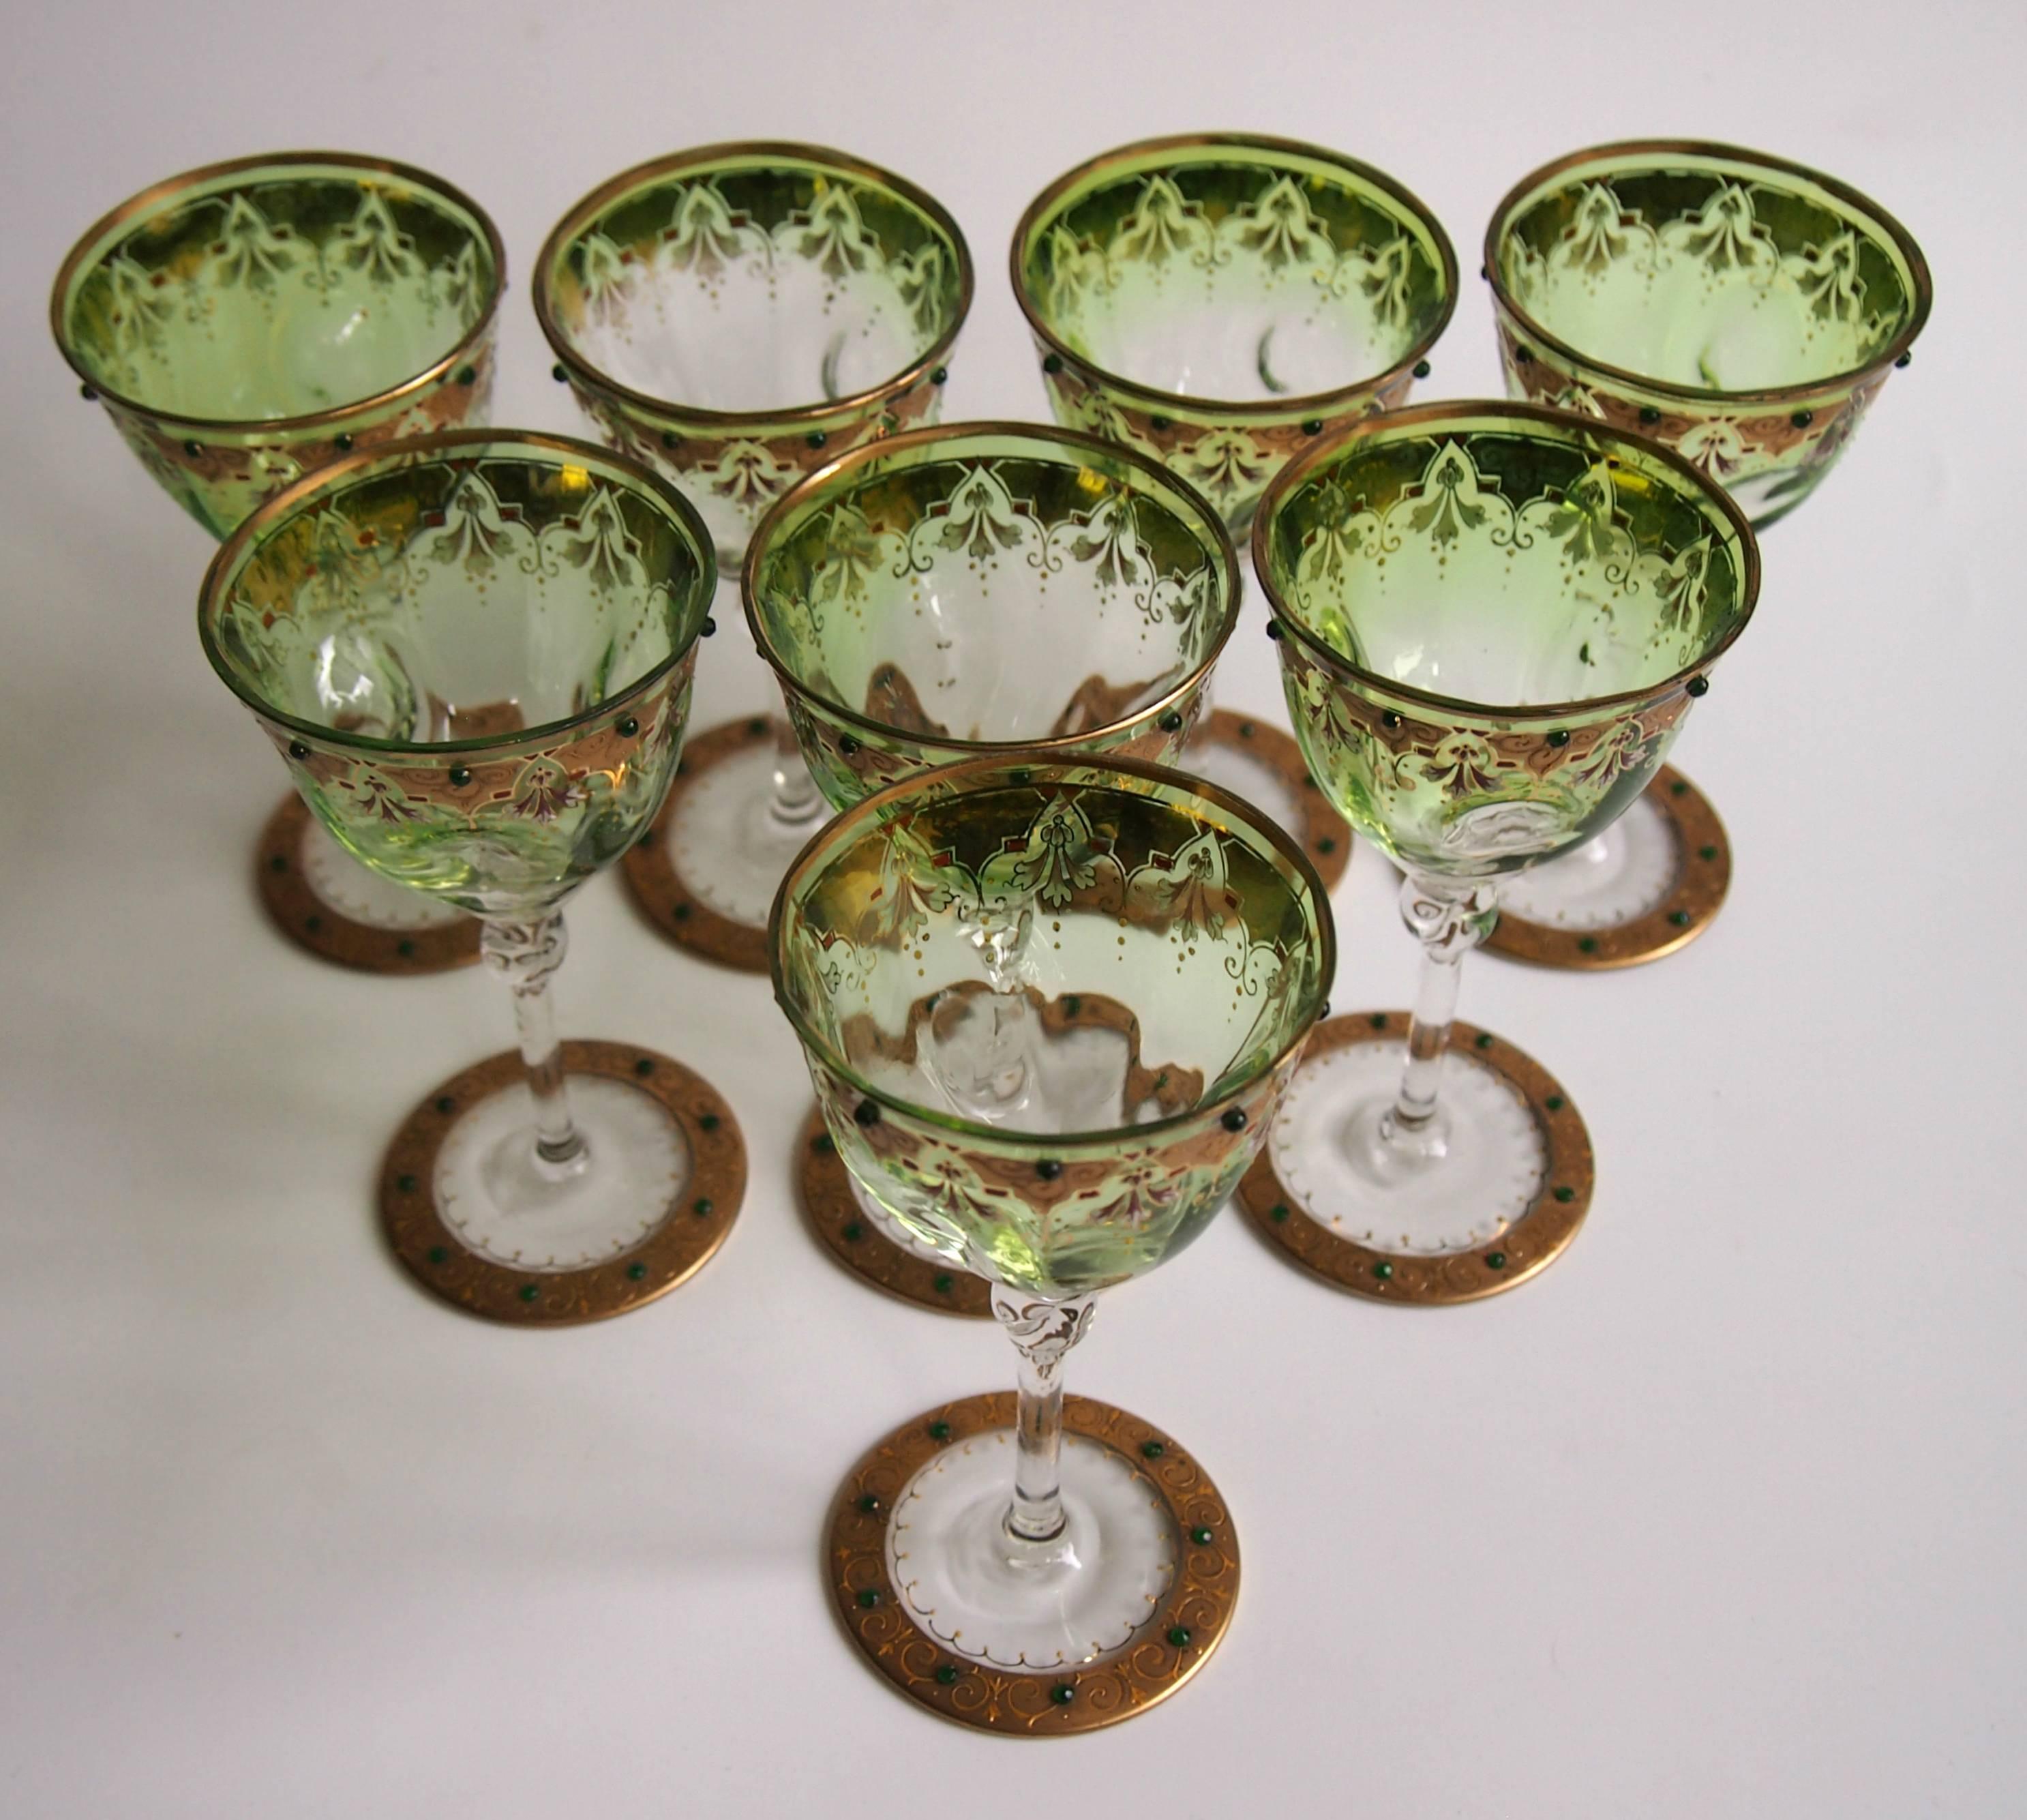 Rare set of eight Moser, early Art Nouveau, green graduating to clear jewelled, gilded and enamelled wine glasses. The glasses have a twisted knop just below the bowl and three dimples in each bowl. We've not seen the glass shapes before, but the